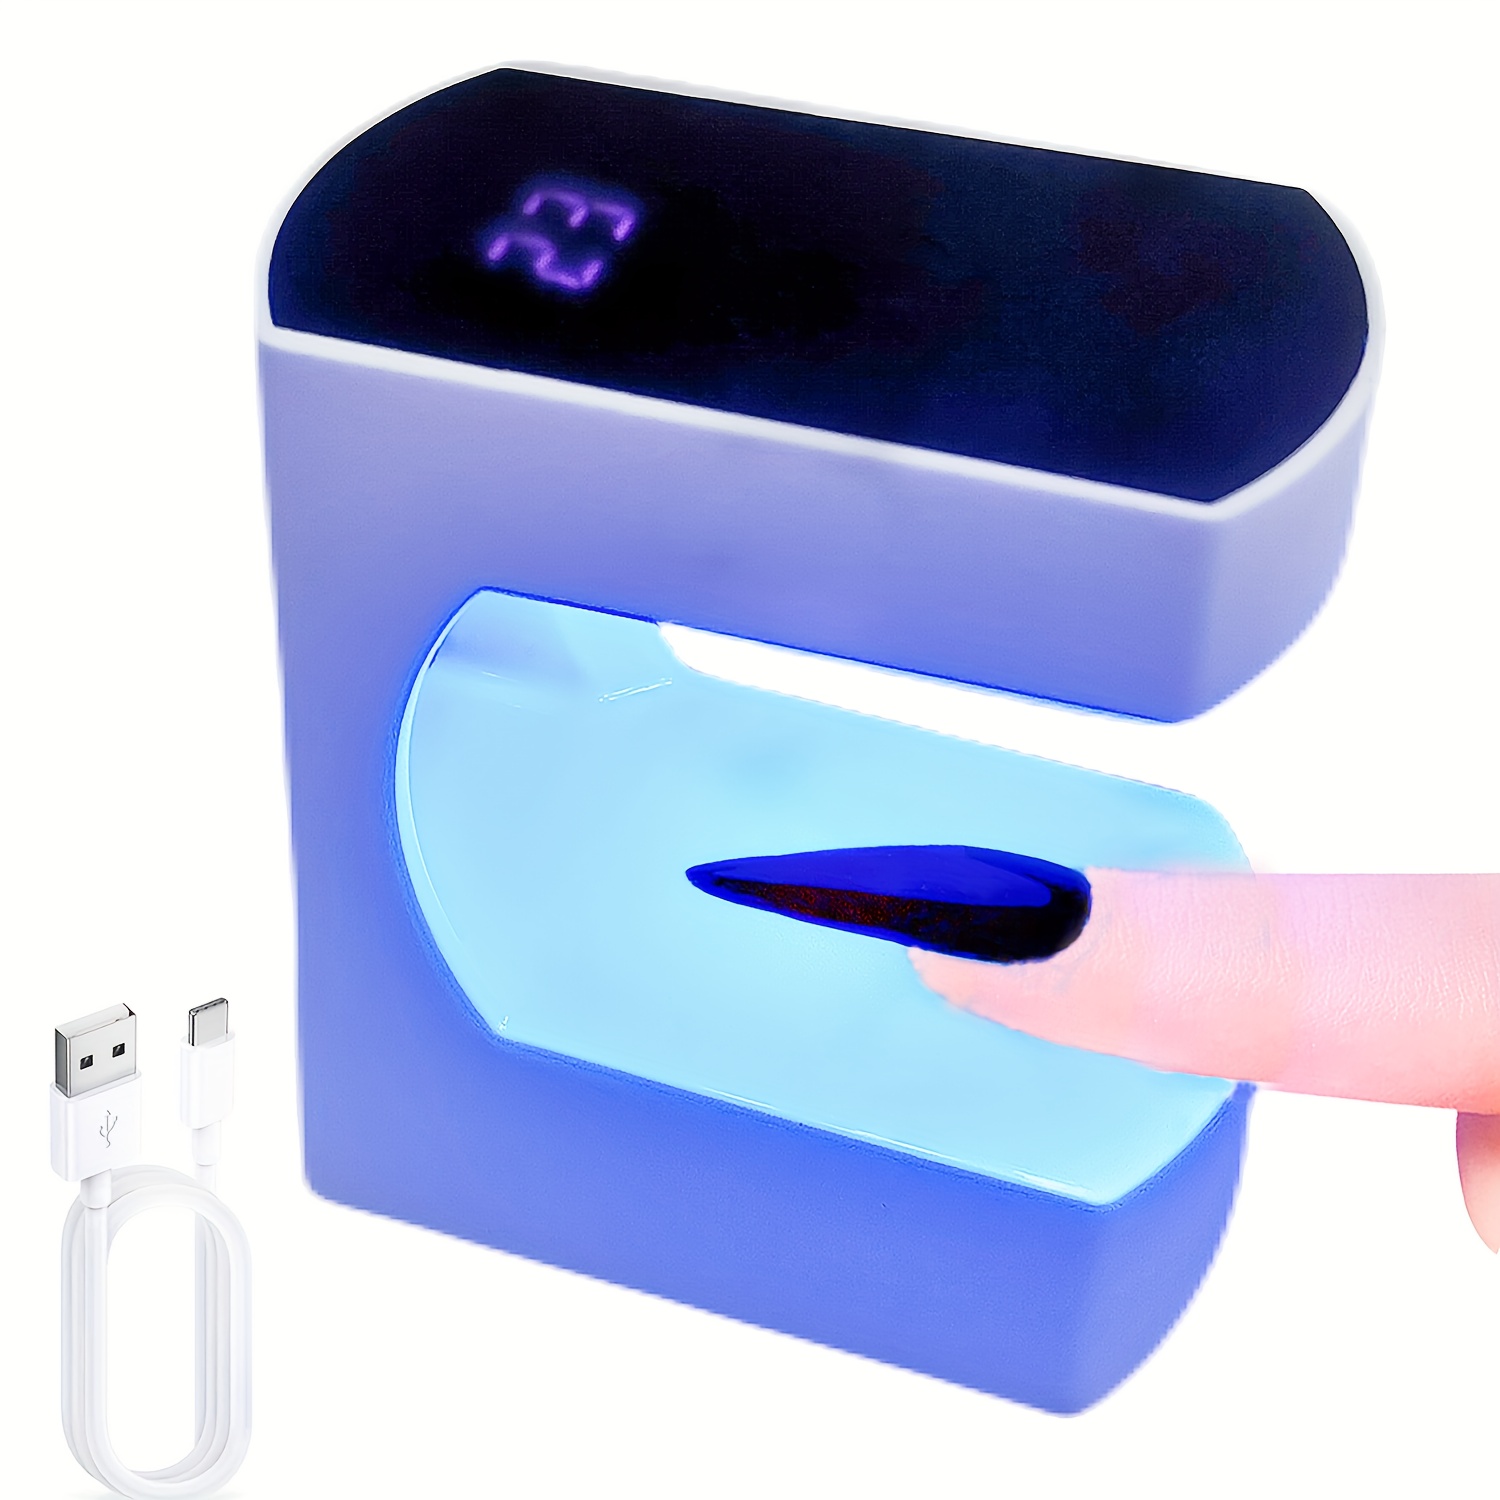 What Wattage Is Best For Gel Nails? [LED Lamp Wattage]